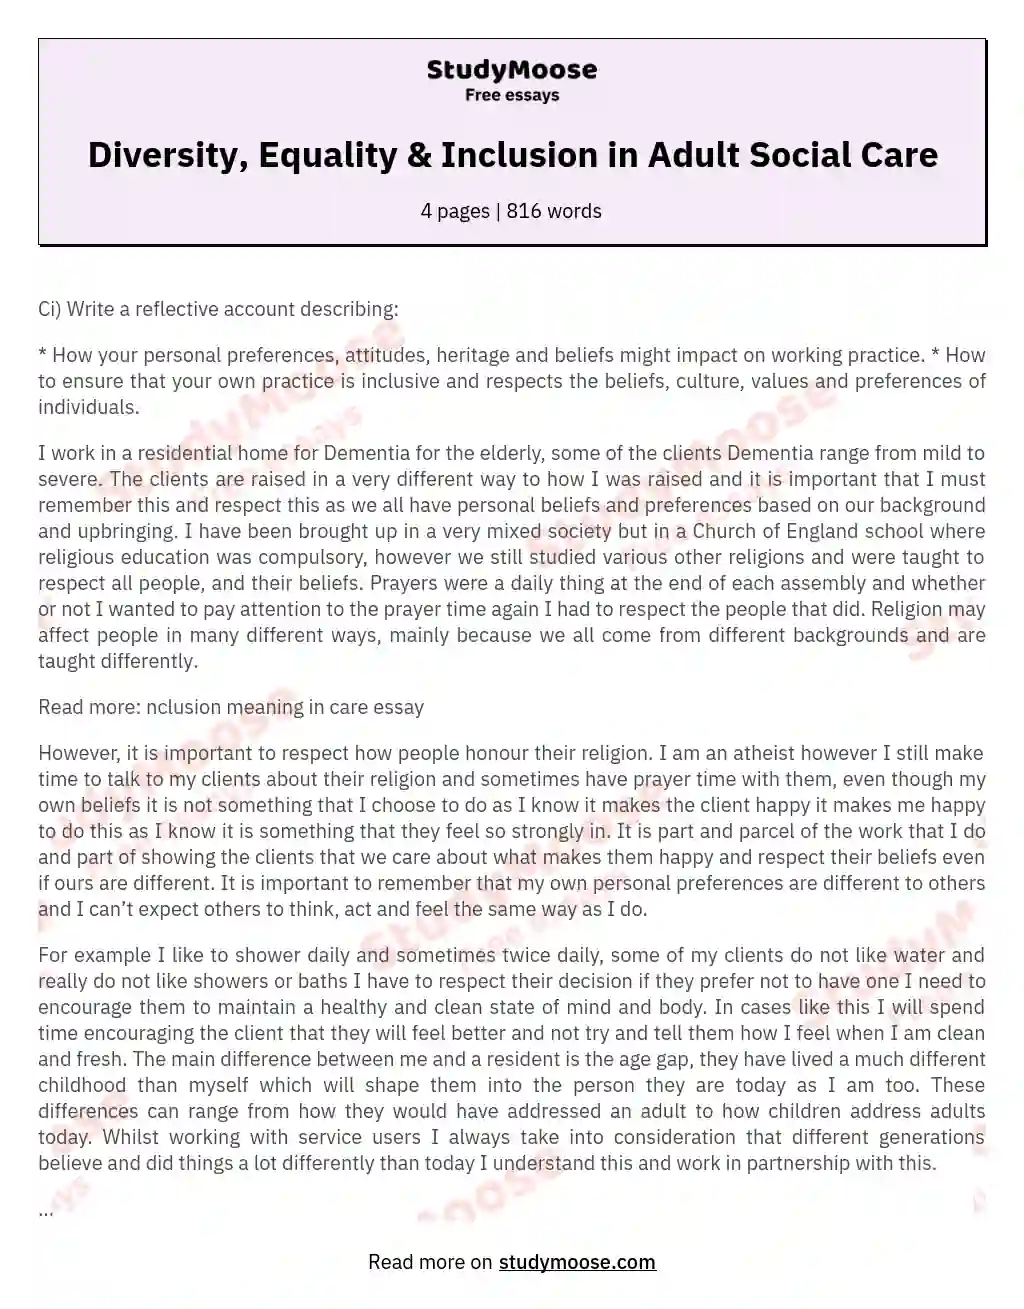 Diversity, Equality & Inclusion in Adult Social Care essay